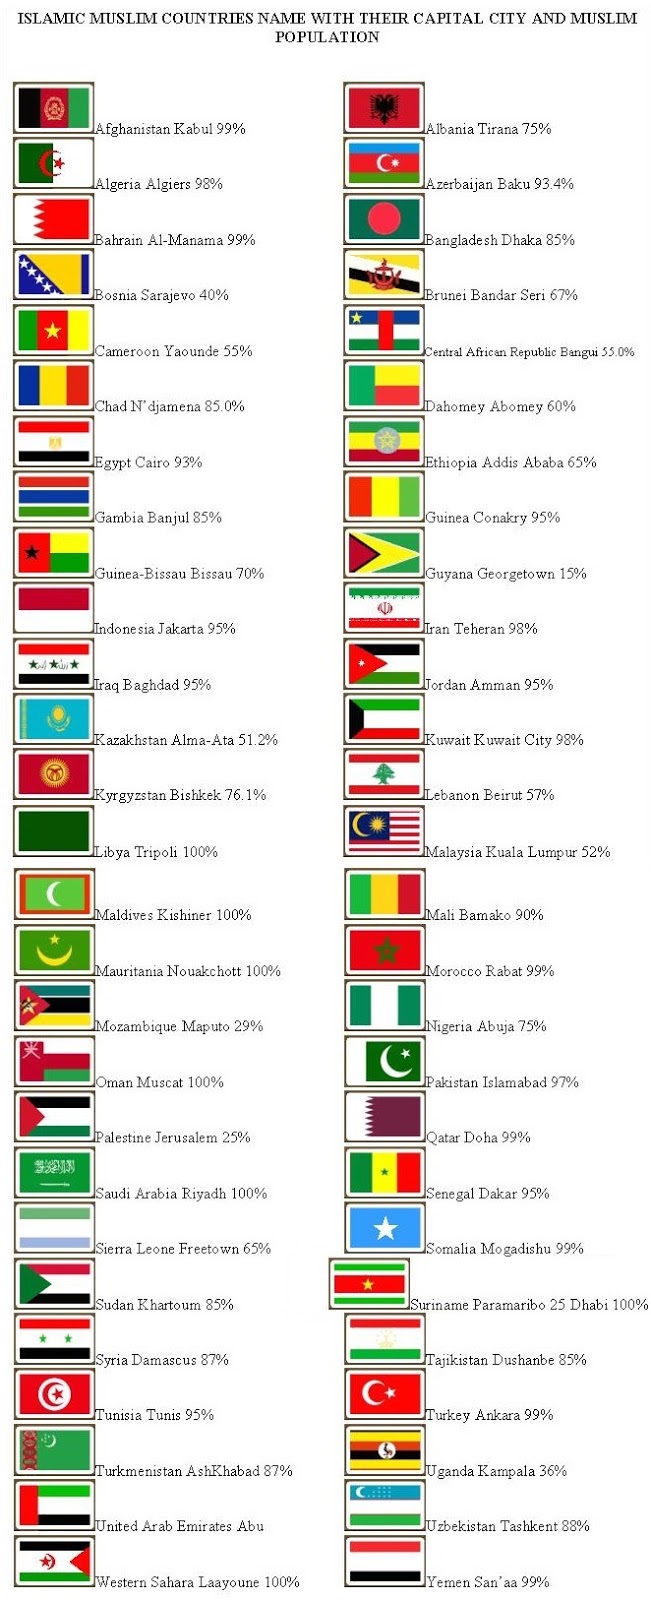 Islamic Muslim Countries Name with Their Capital City and Muslim Population percentage